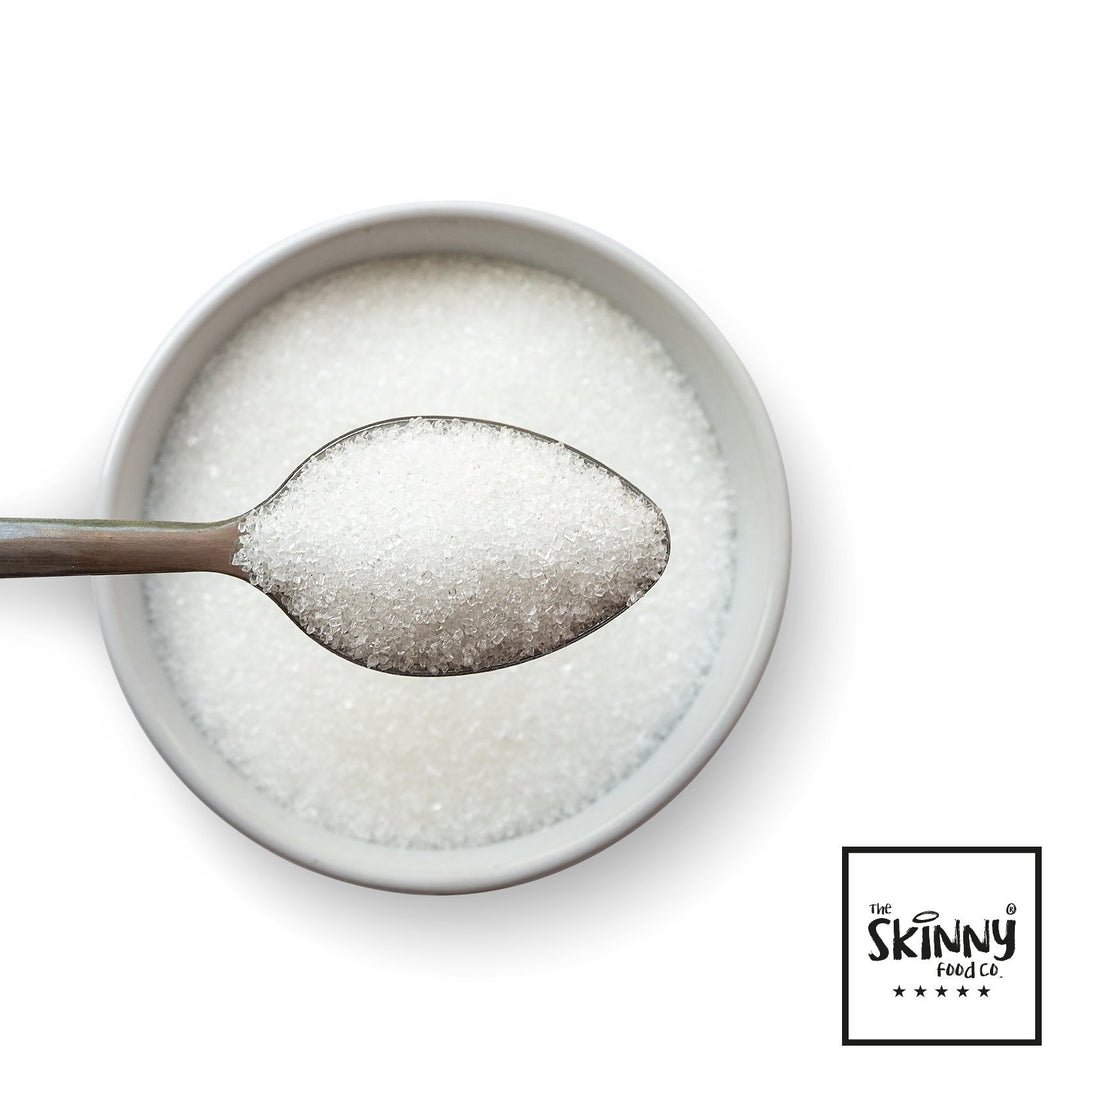 Savvy Food Swaps To Cut Out Sugar - theskinnyfoodco